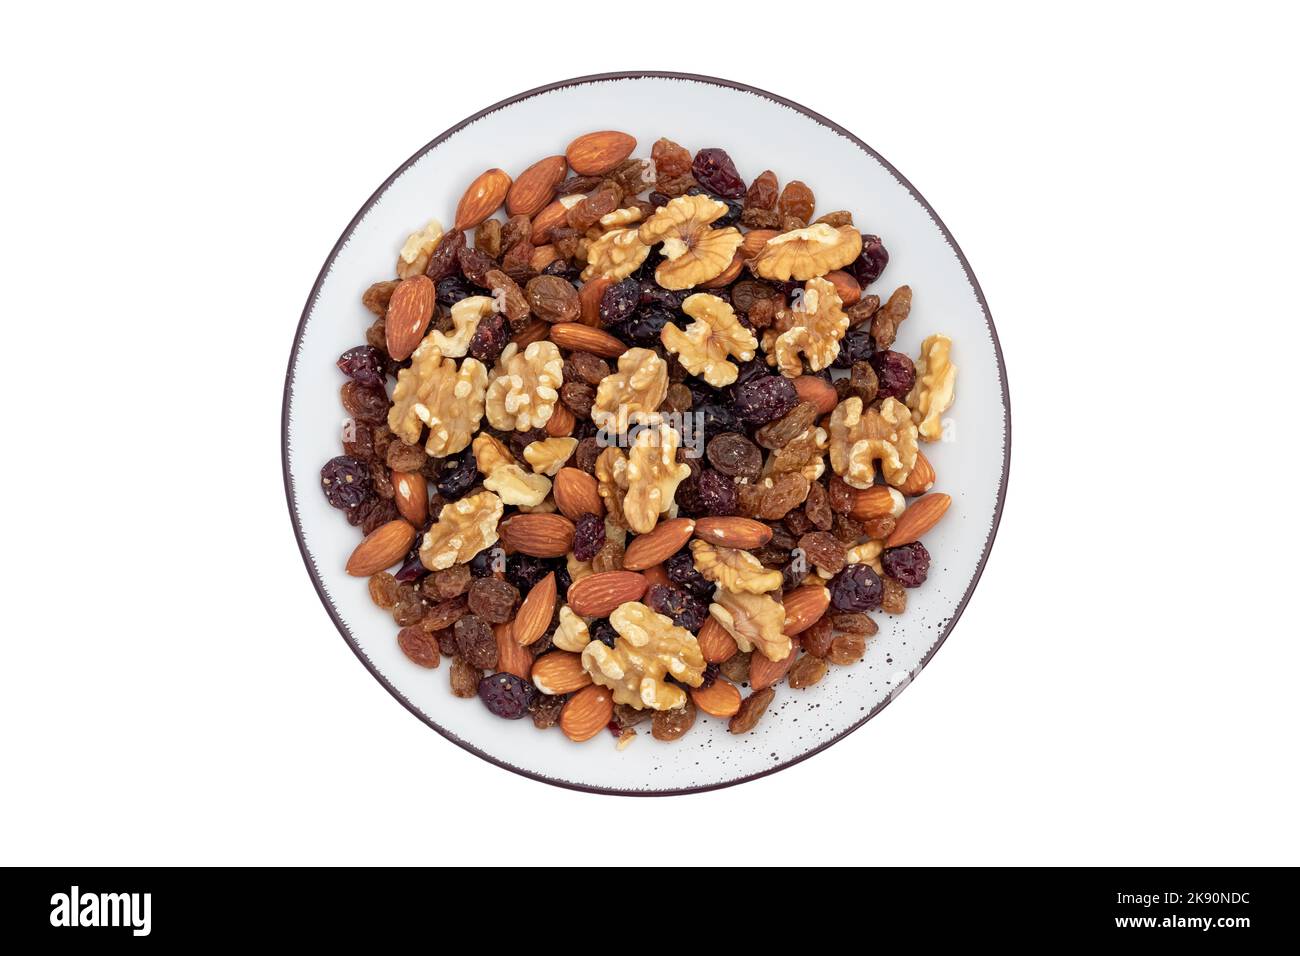 Healthy snack: mixed nuts and dried fruits in ceramic plate isolated on a white background. Almond, walnut, cranberry, raisin. Top view. Vegetarian fo Stock Photo